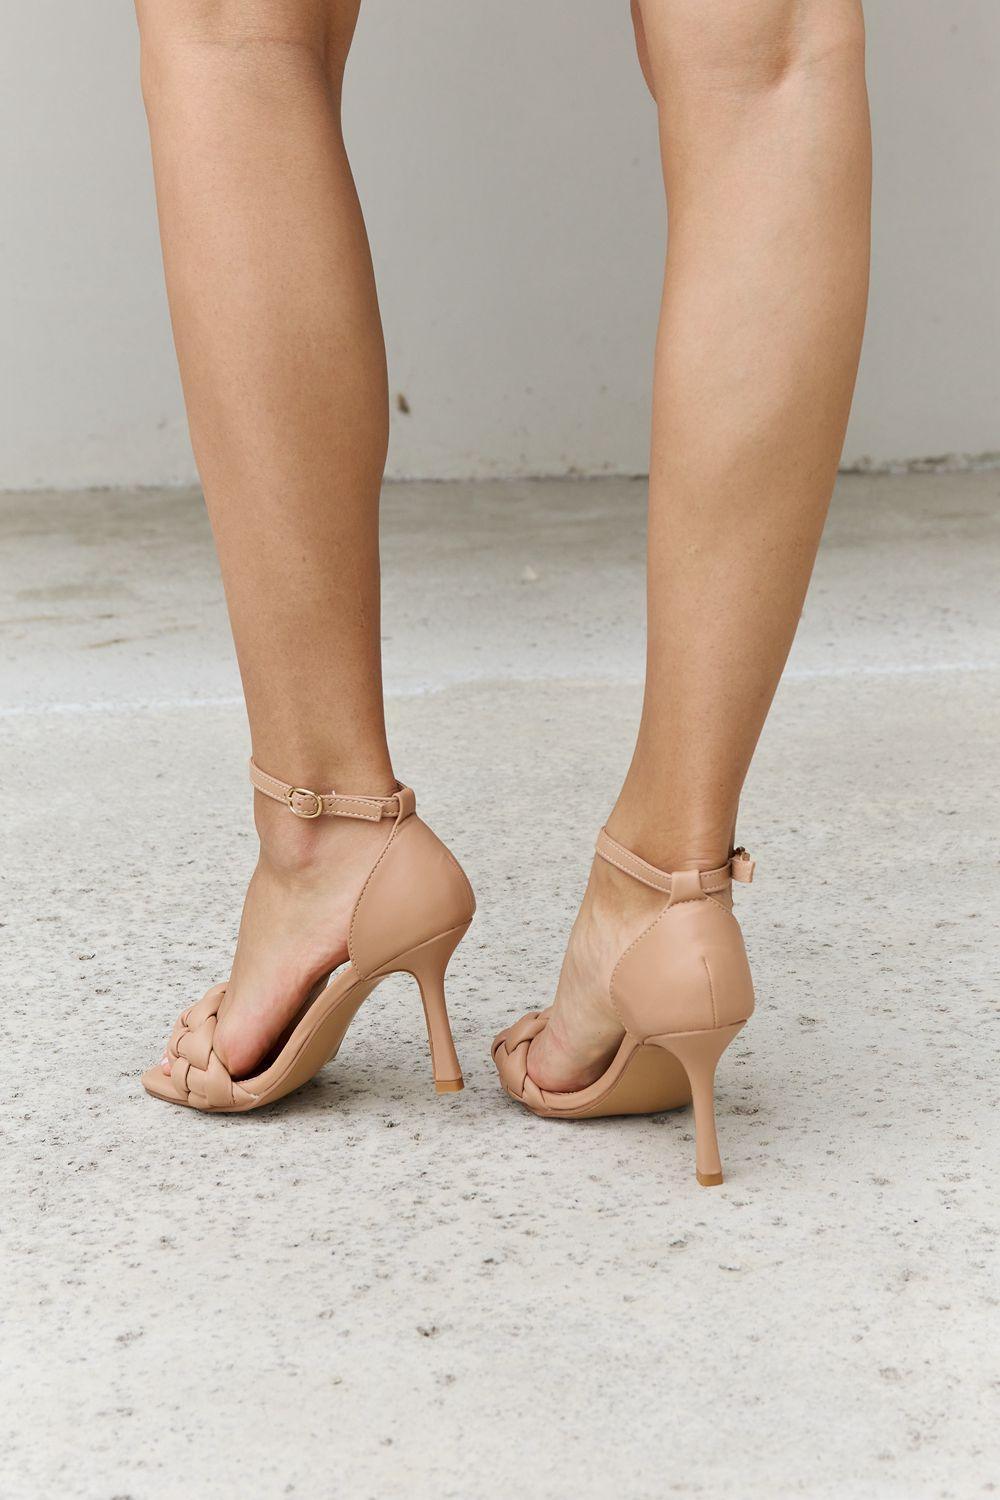 Forever Link Classy Braided Nude Strappy Heels - MXSTUDIO.COM